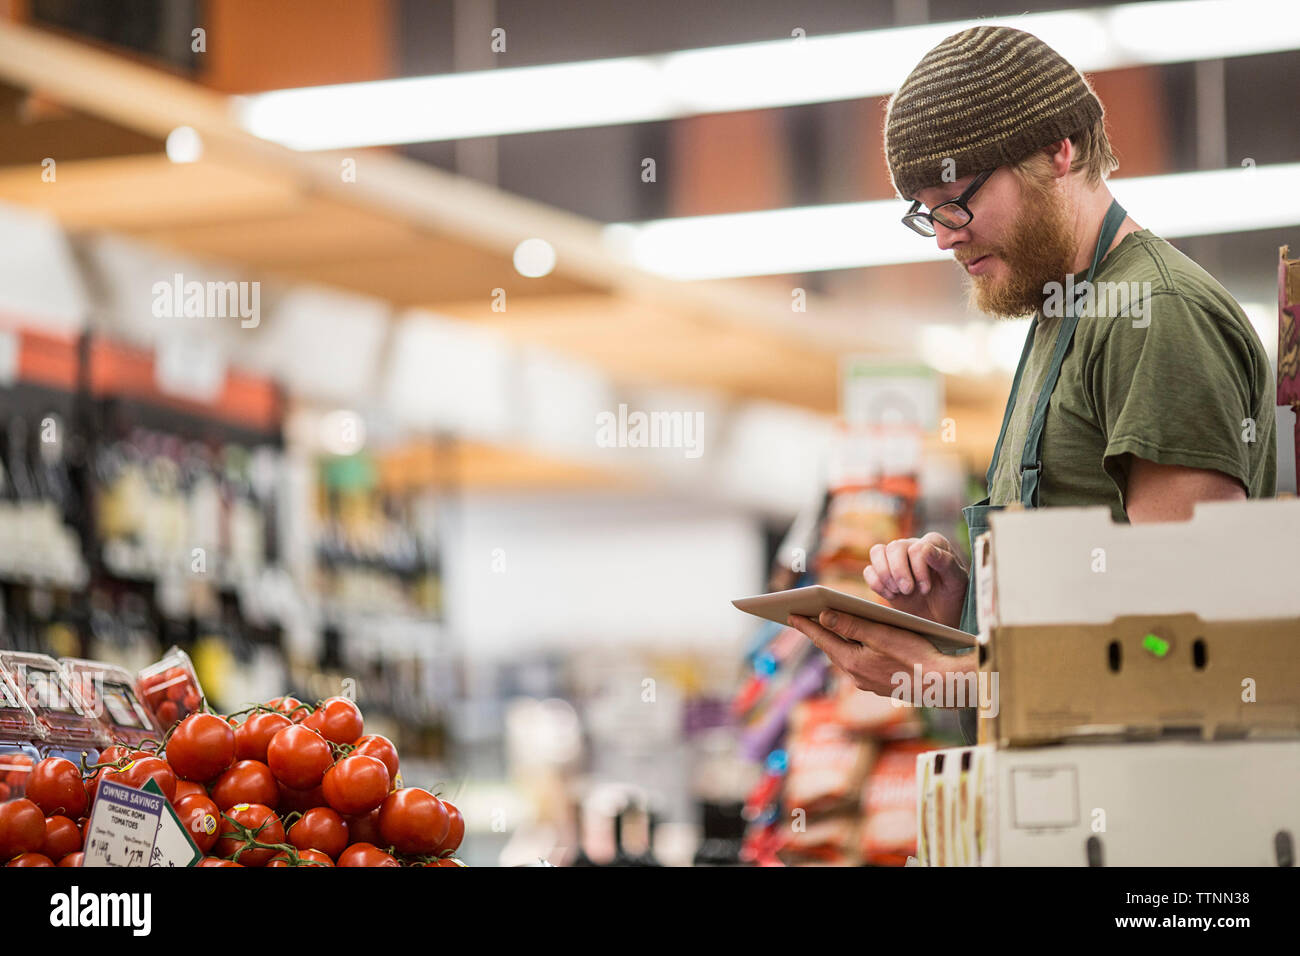 worker using tablet computer at supermarket Stock Photo